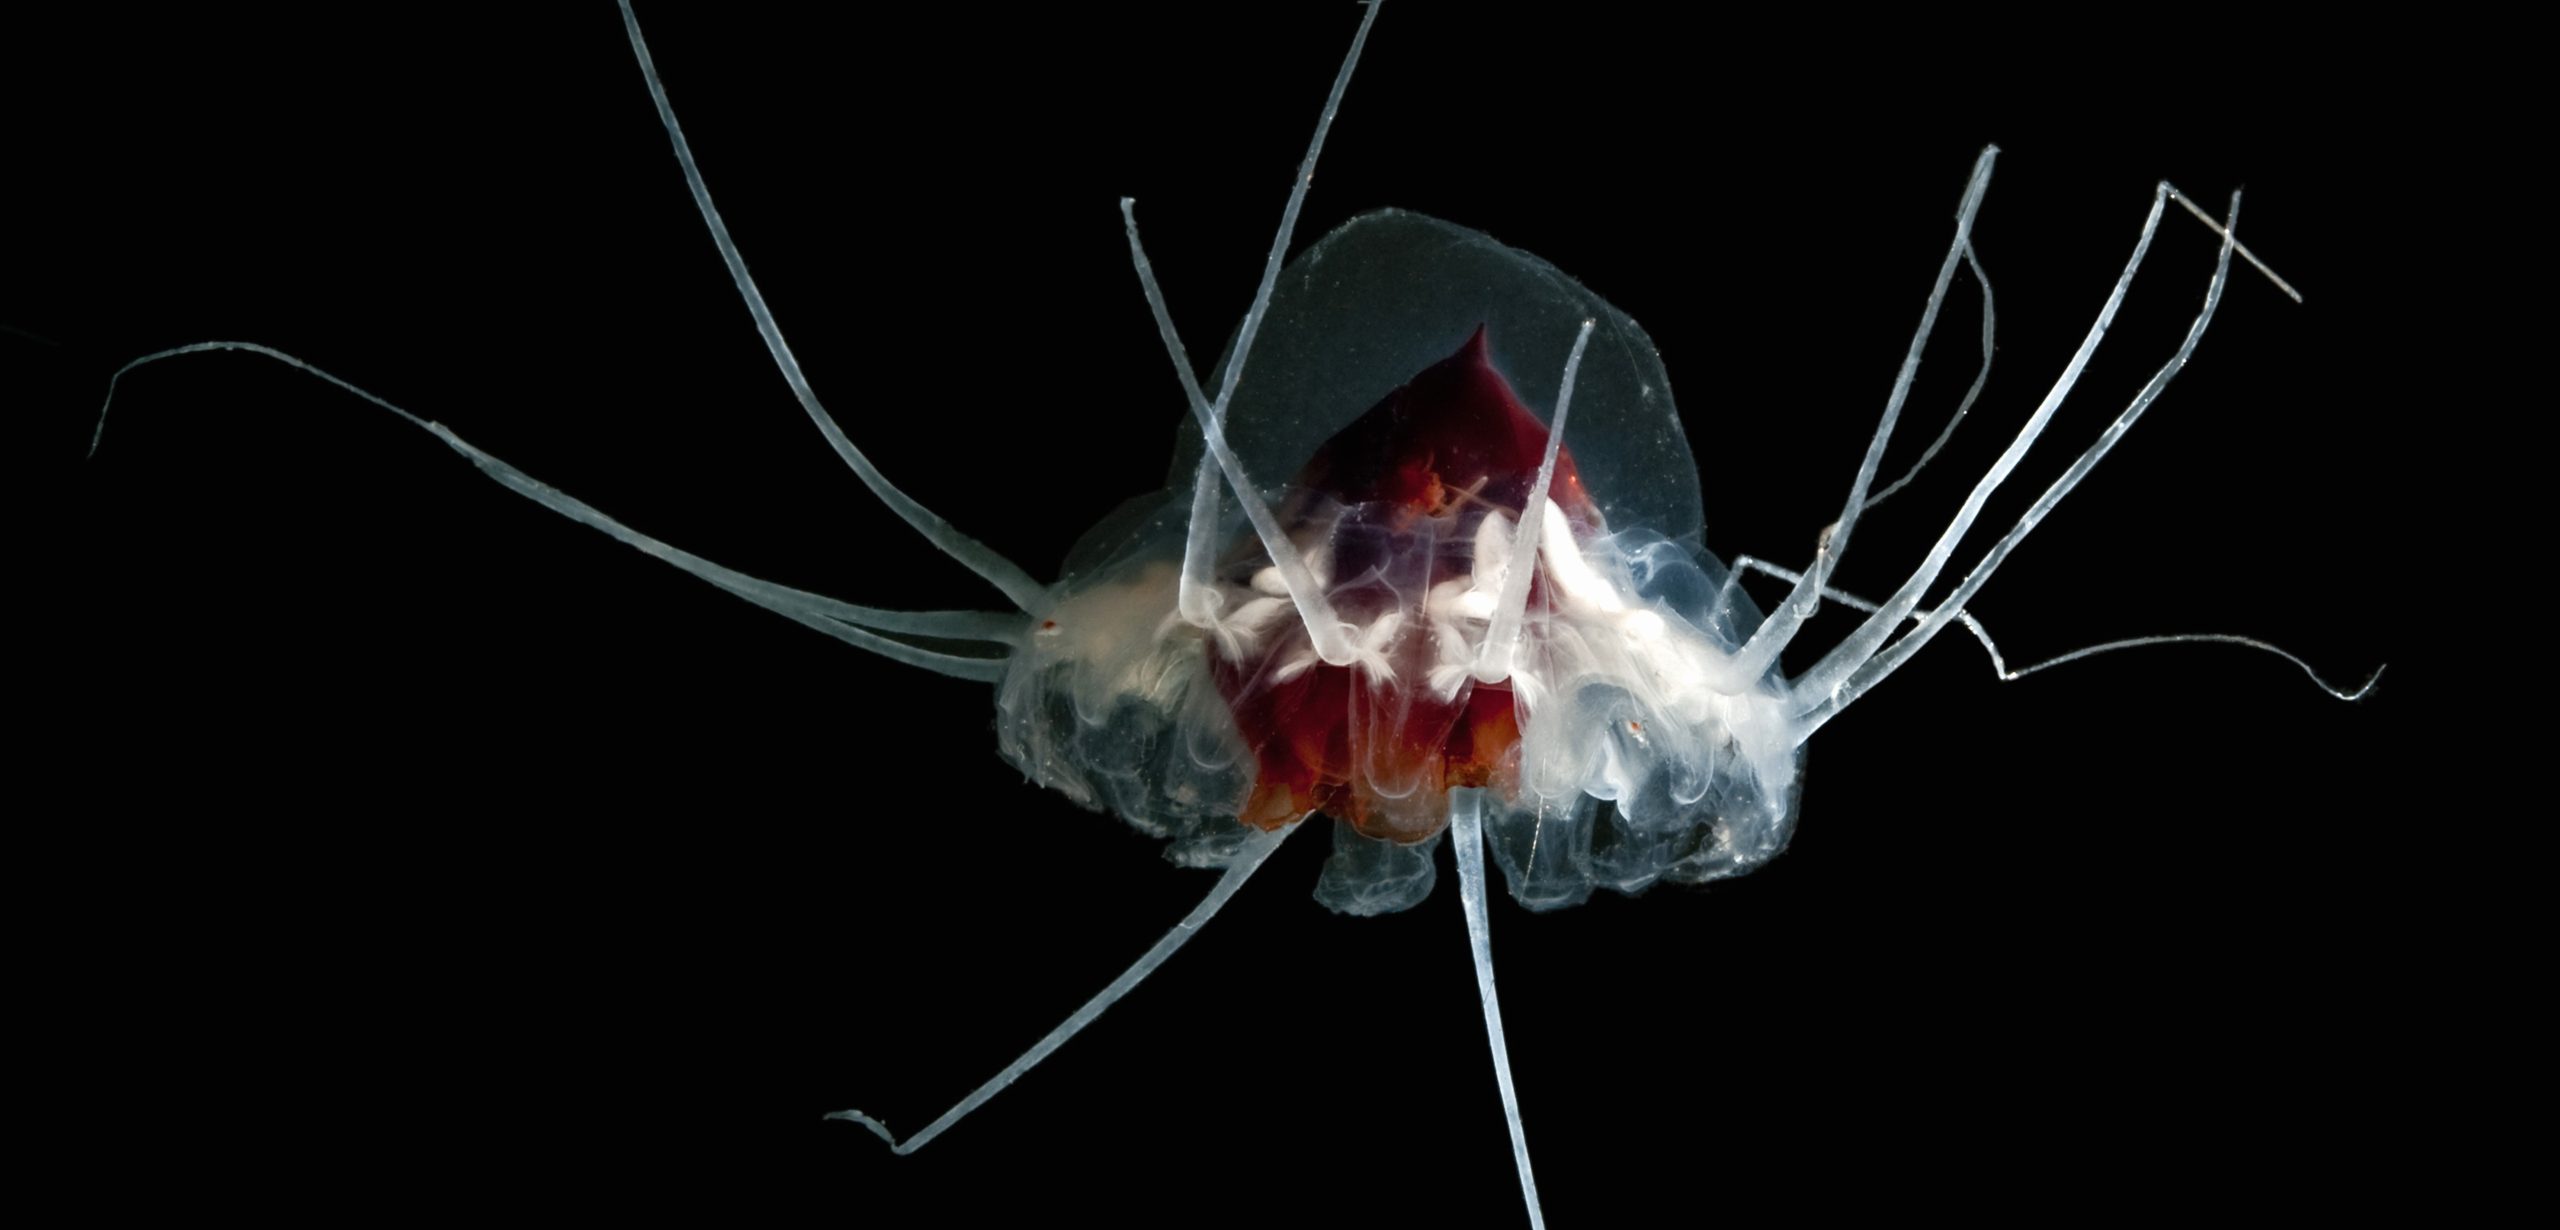 The helmet jellyfish is a deep sea species, and spends most of its time hundreds or even thousands of meters below the surface. Photo by Sonke Johnsen/Visuals Unlimited/Corbis